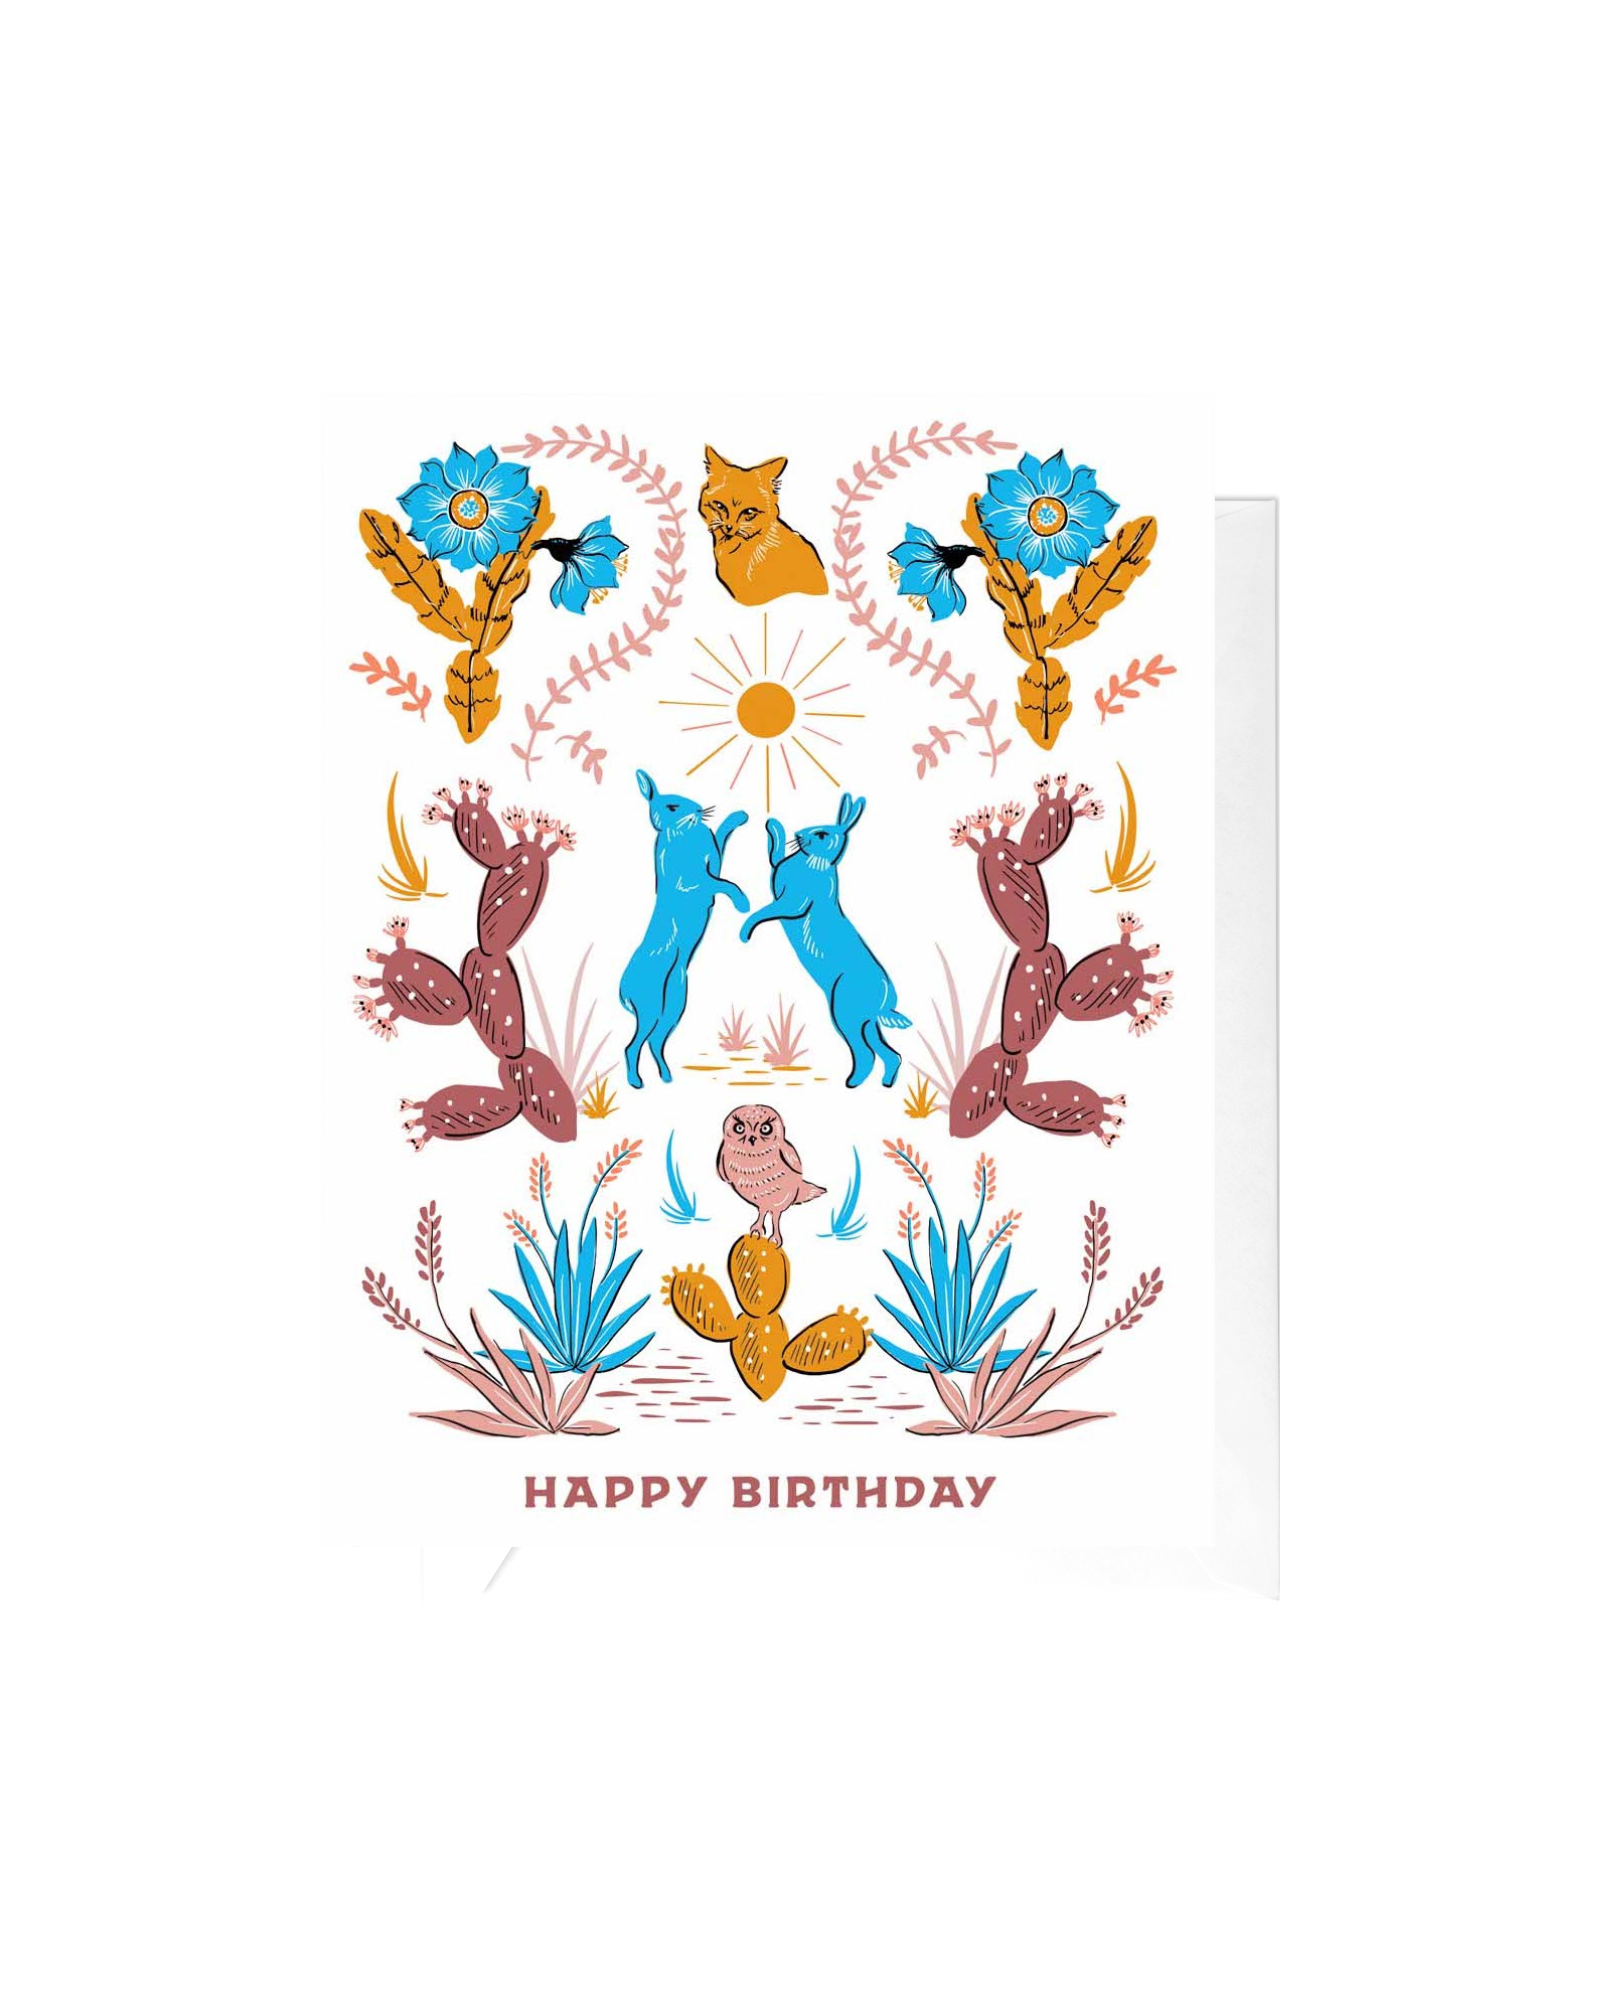 Greeting card and envelope. Text reads "happy birthday" bottom center. Illustrations are in bright blue, red, and yellow and are of different desert plants and animals.